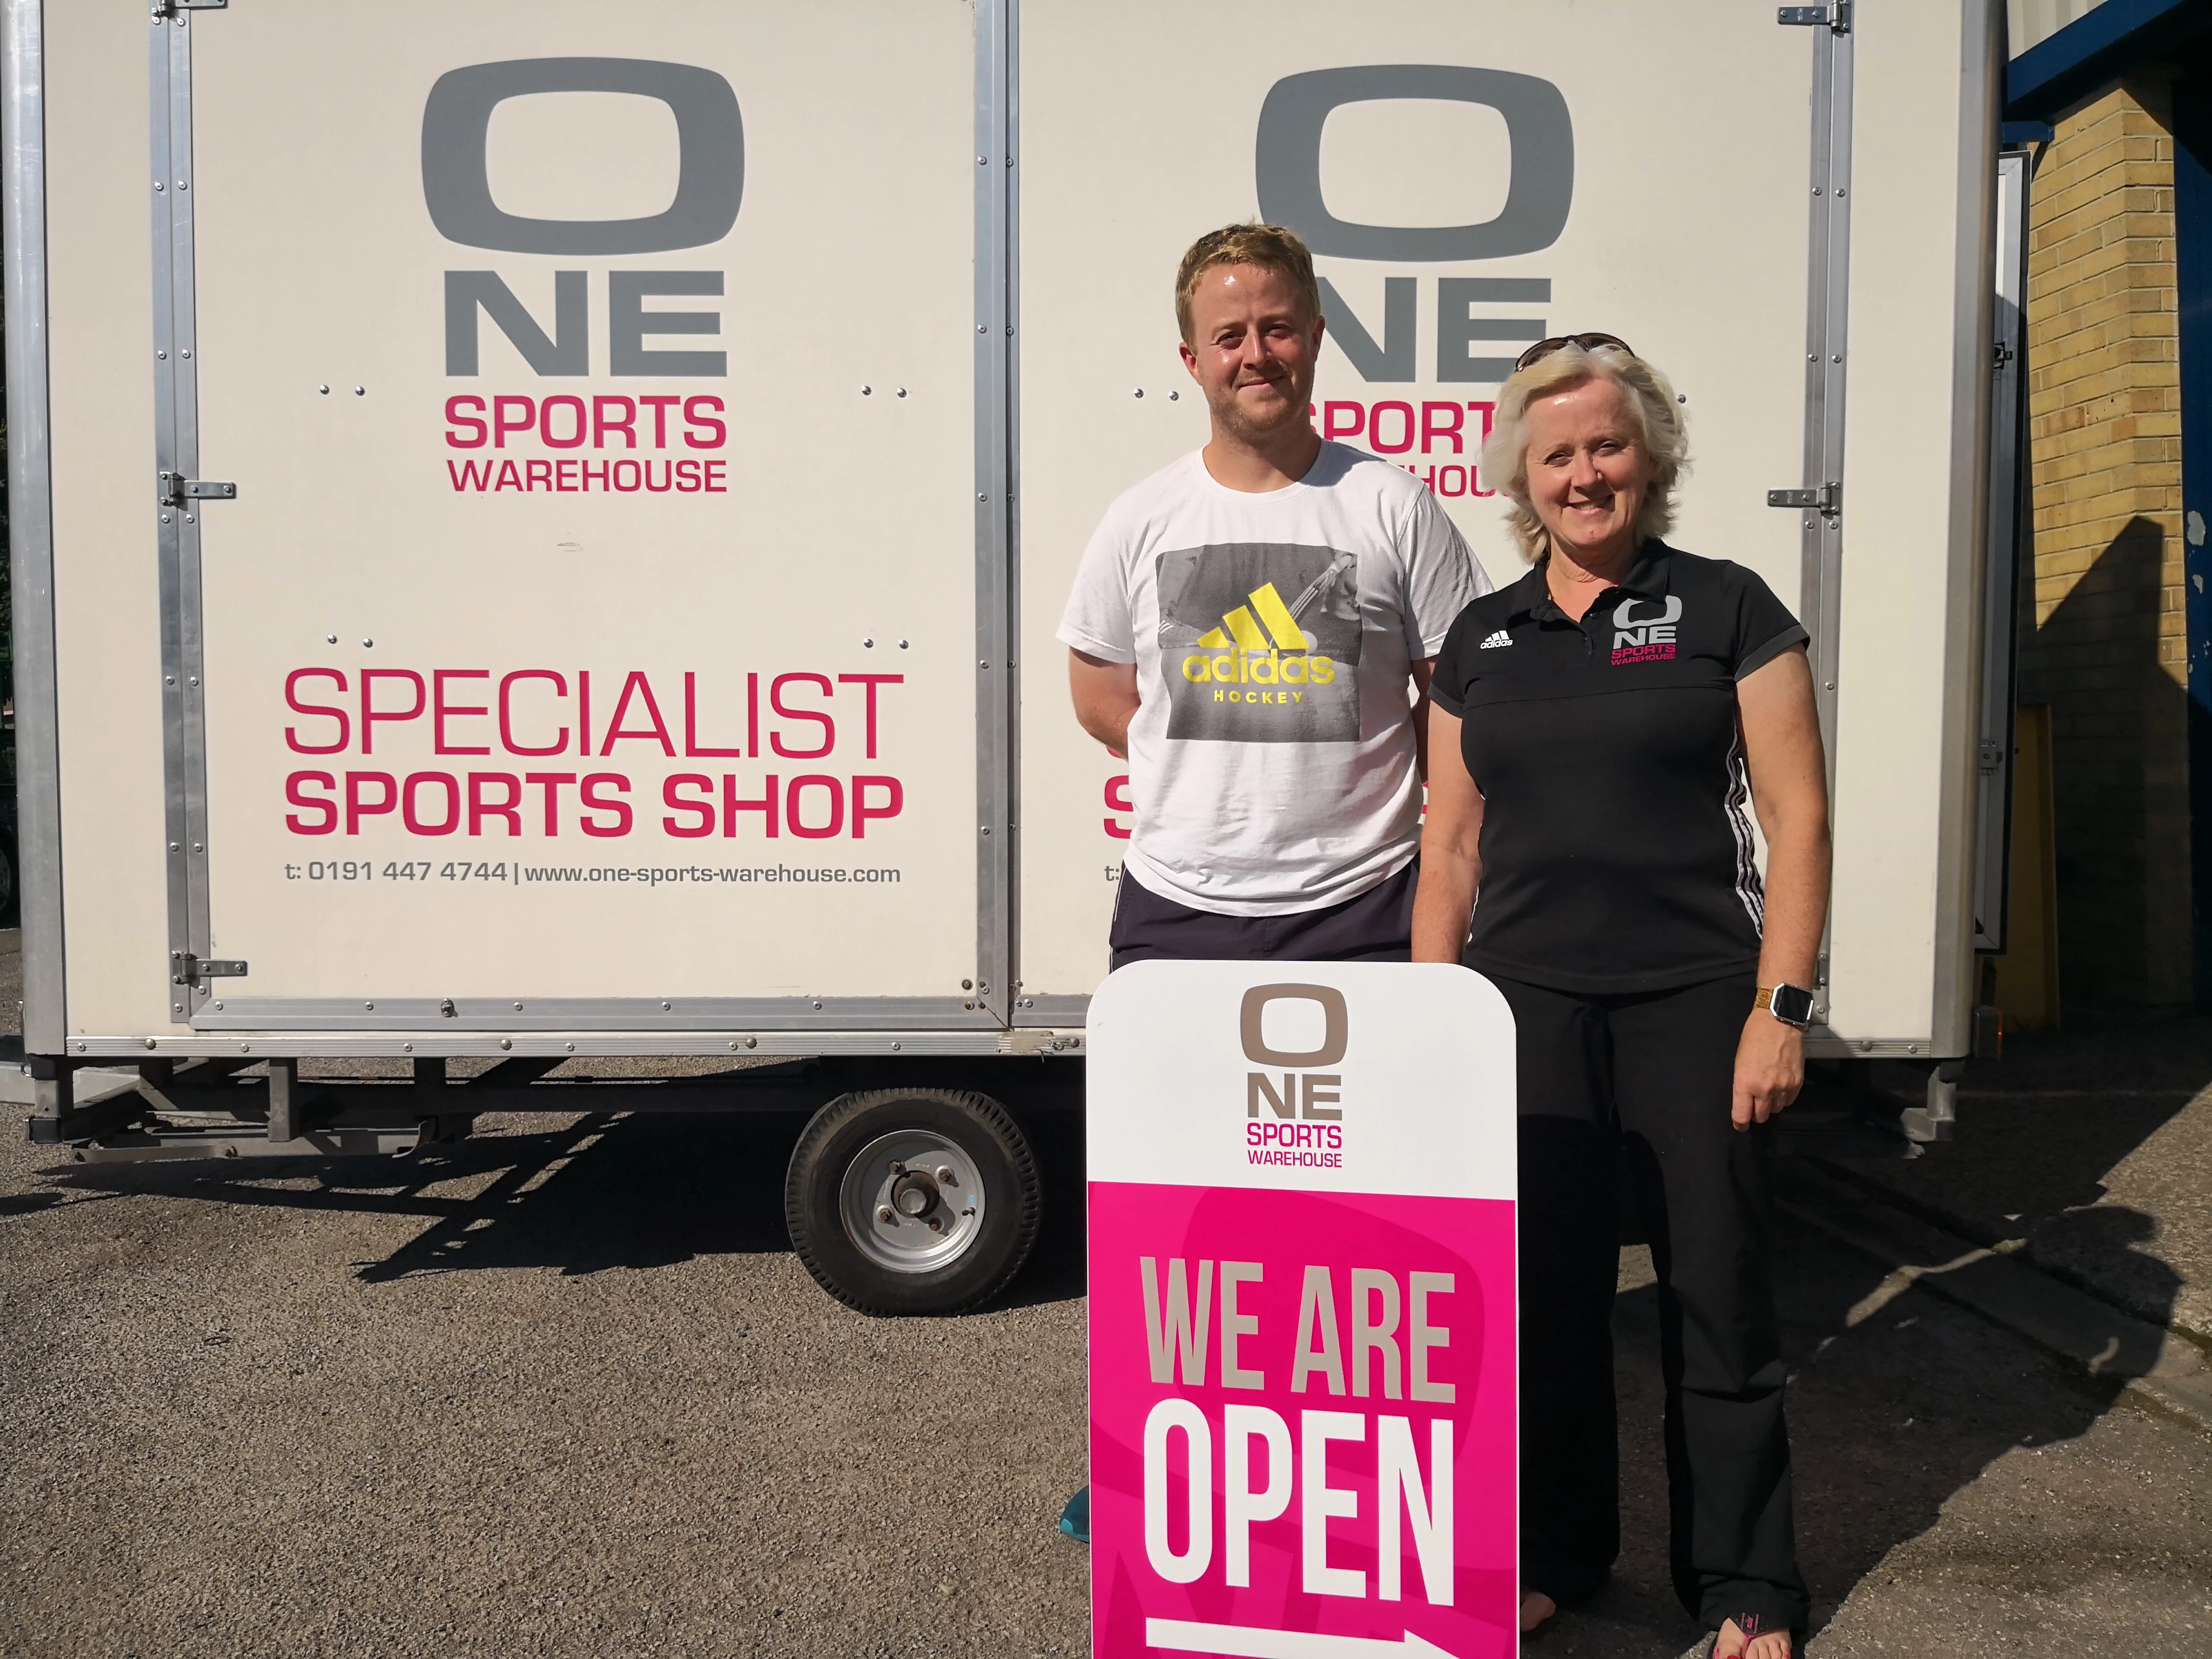 One Sports Warehouse specialises in hockey and sports equipment